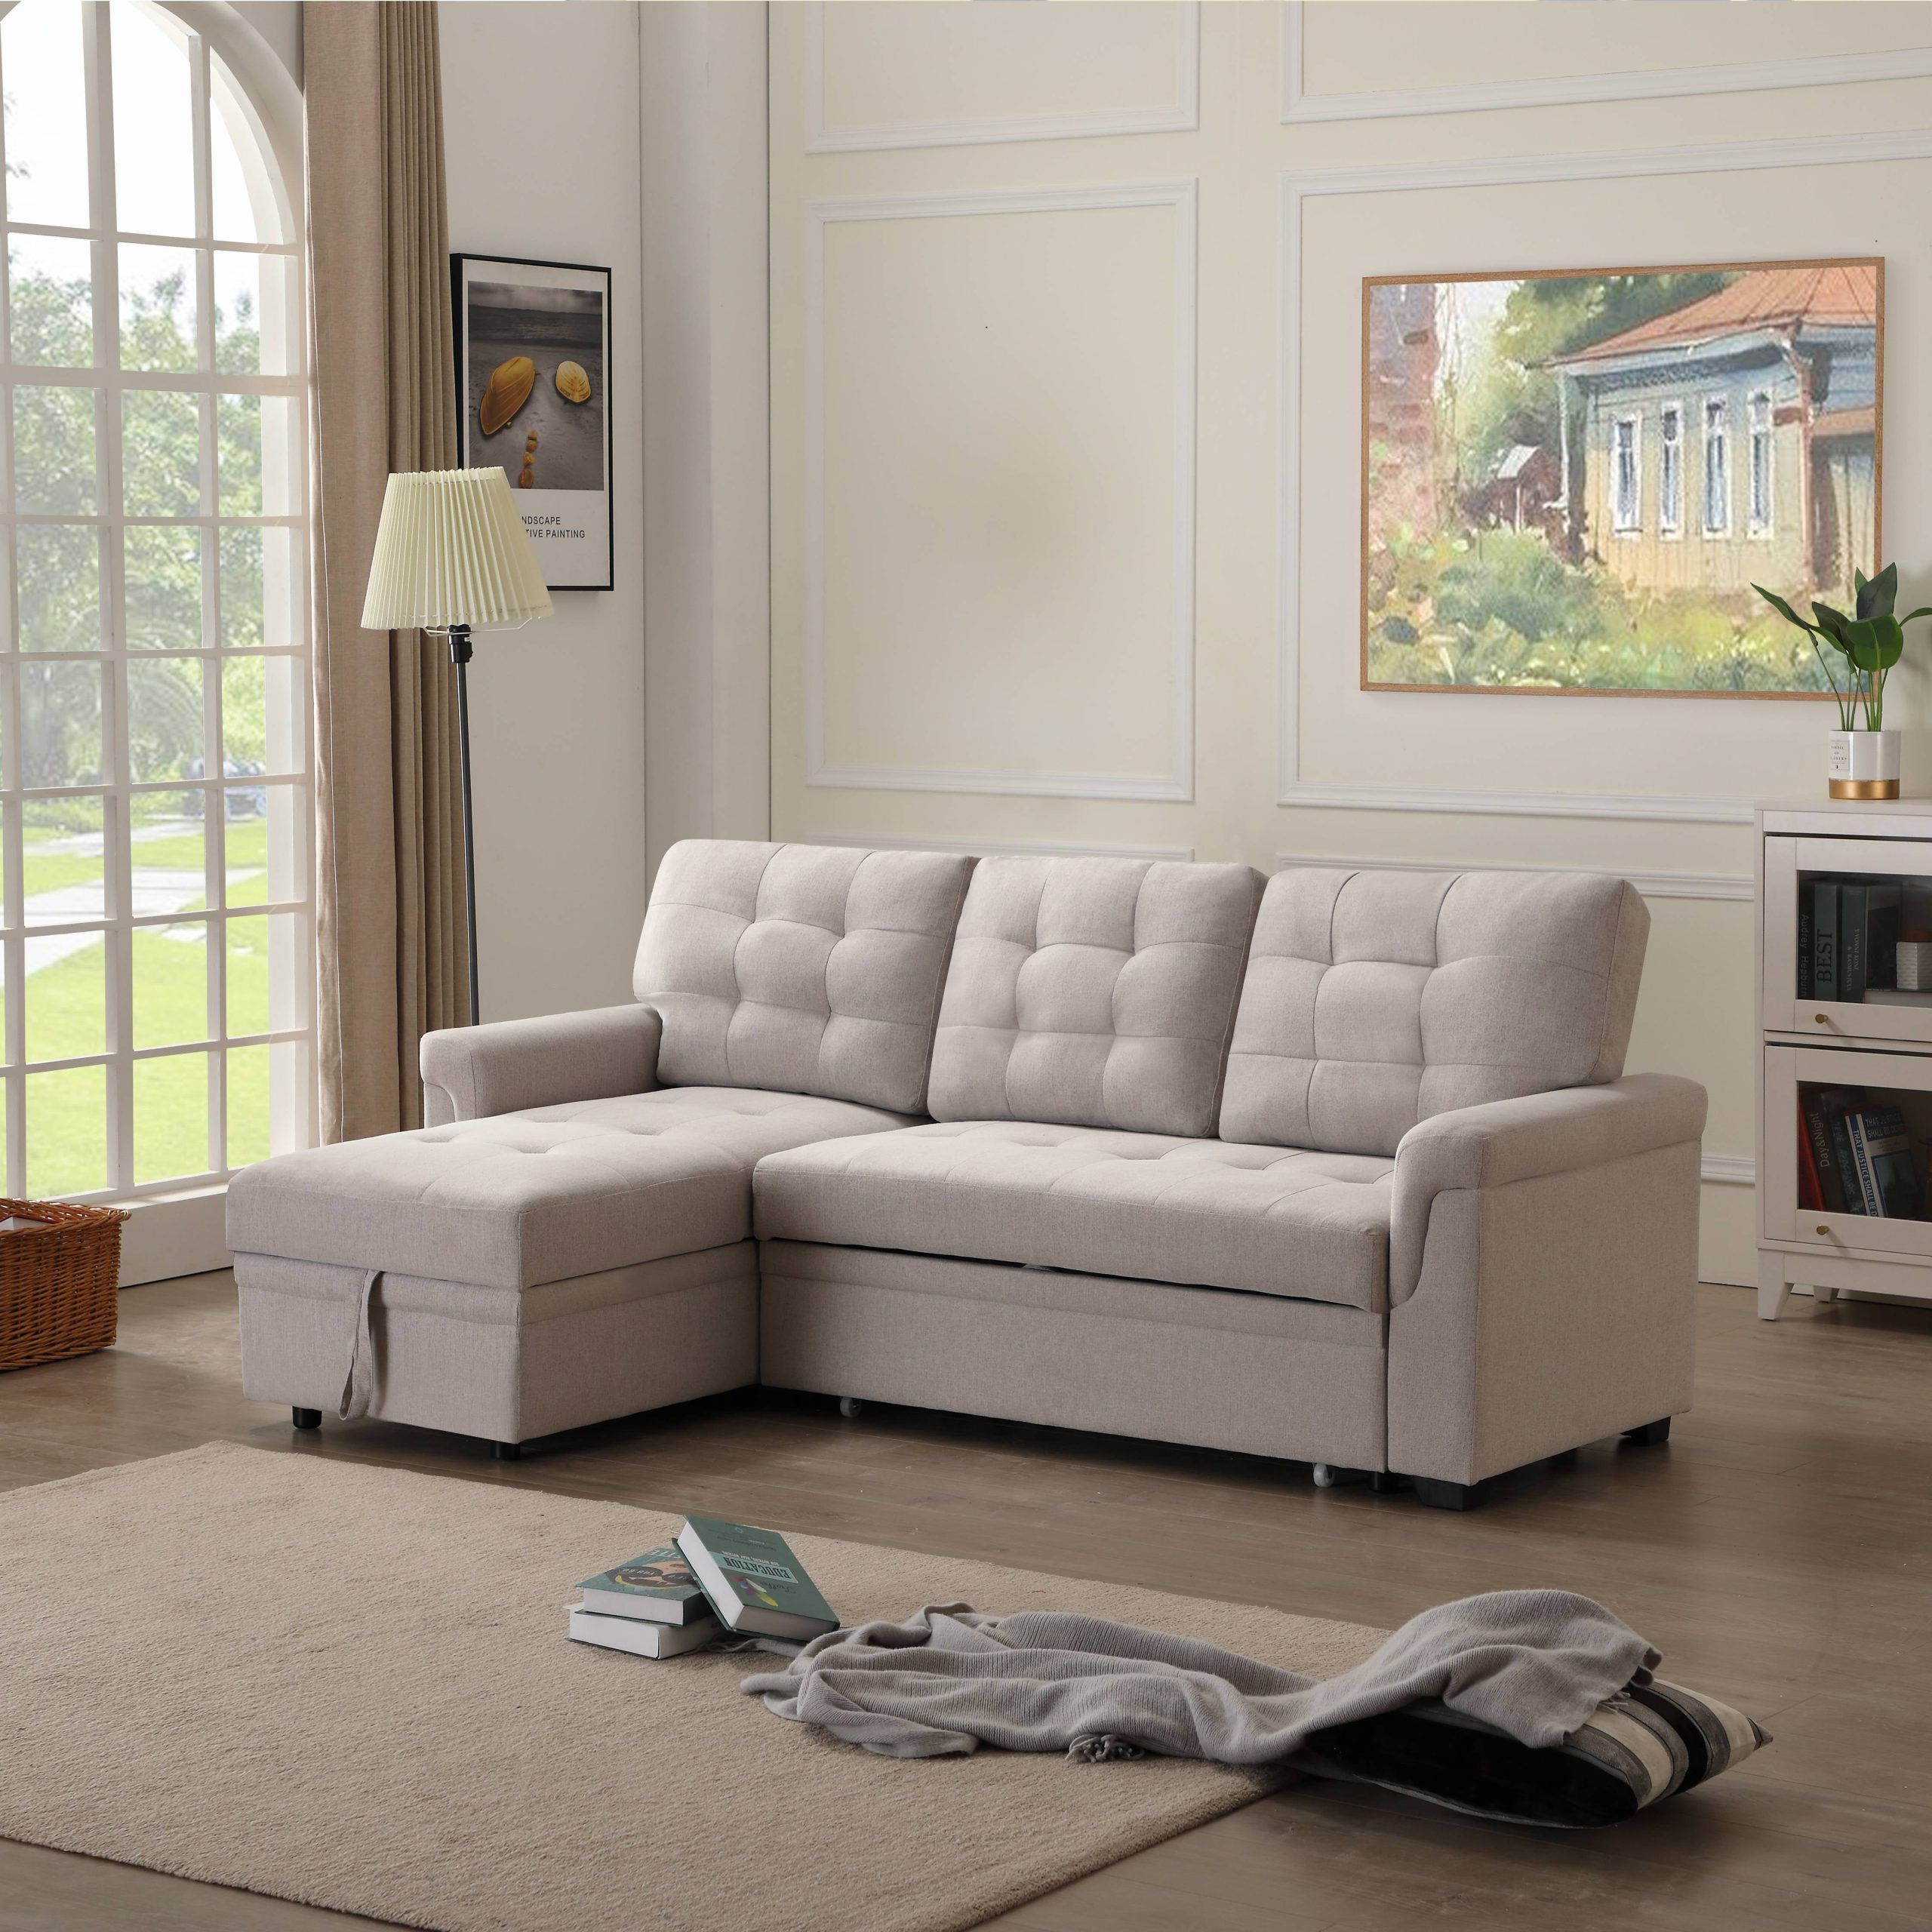 Featured Photo of 21 Ideas of Small L Shaped Sectional Sofas in Beige